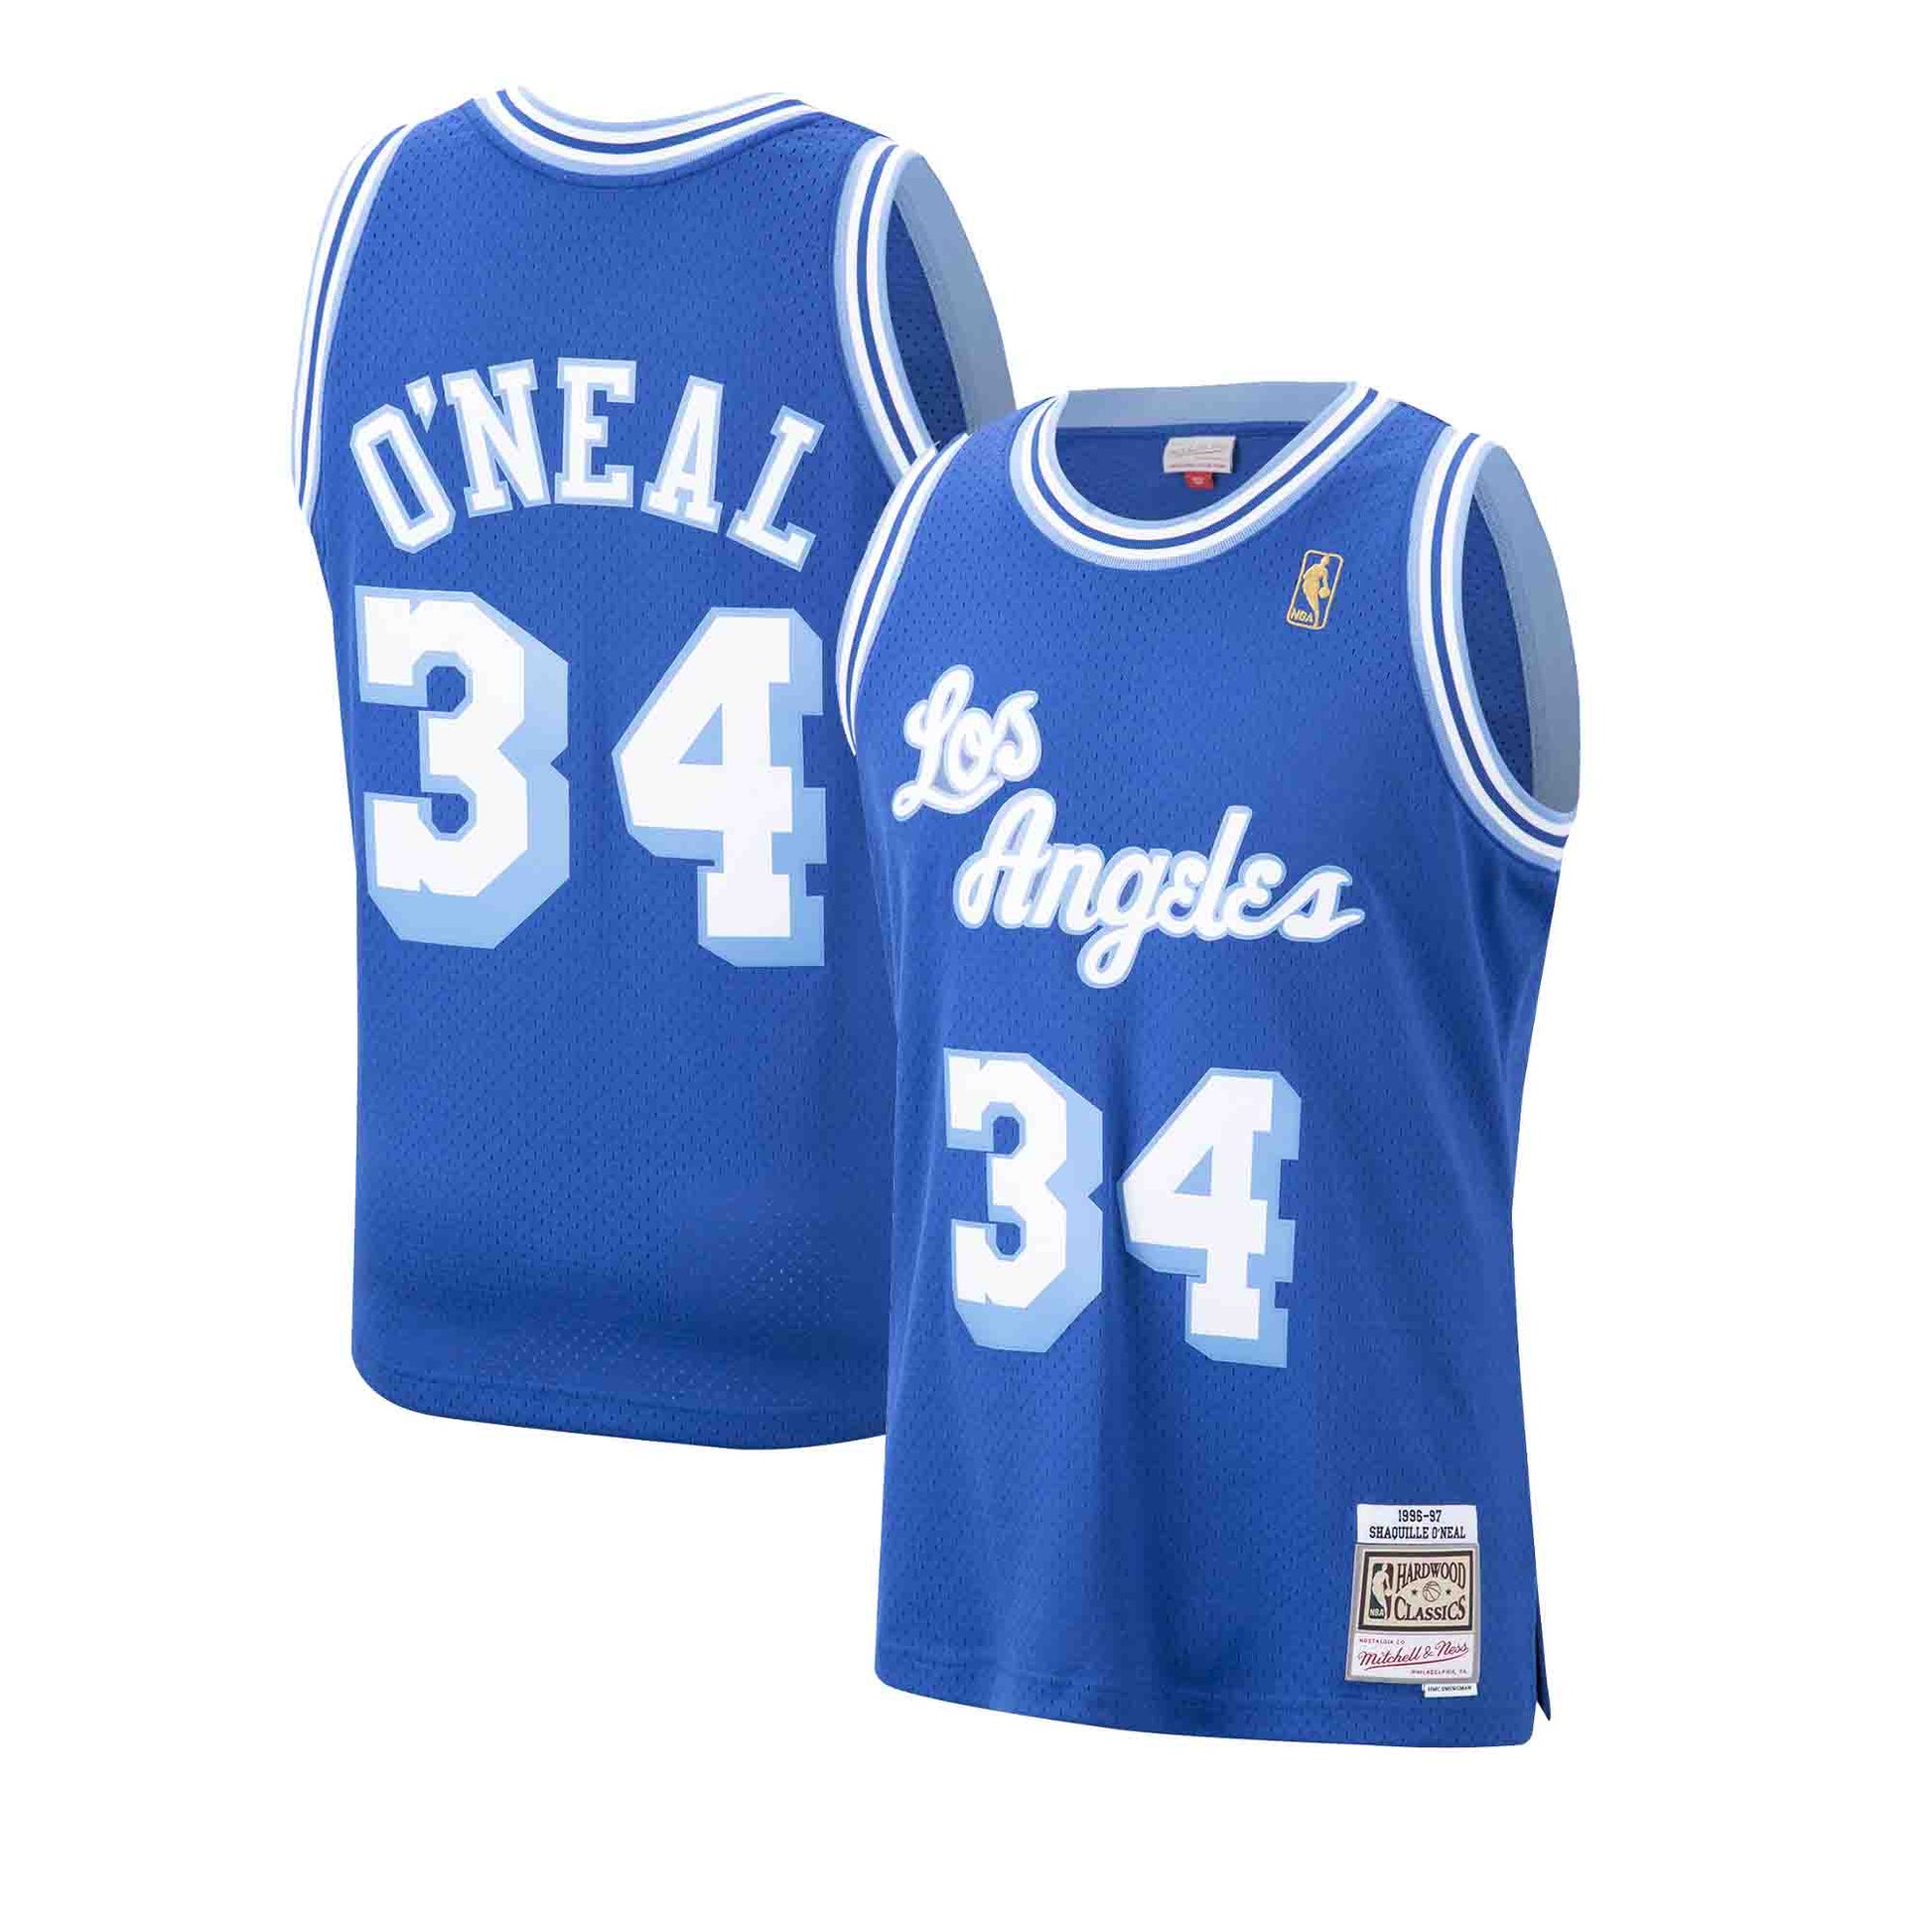 🤑 Astro Swingman Shaquille O'Neal Los Angeles Lakers 1996-97 Jersey 🔥🏀🤑  